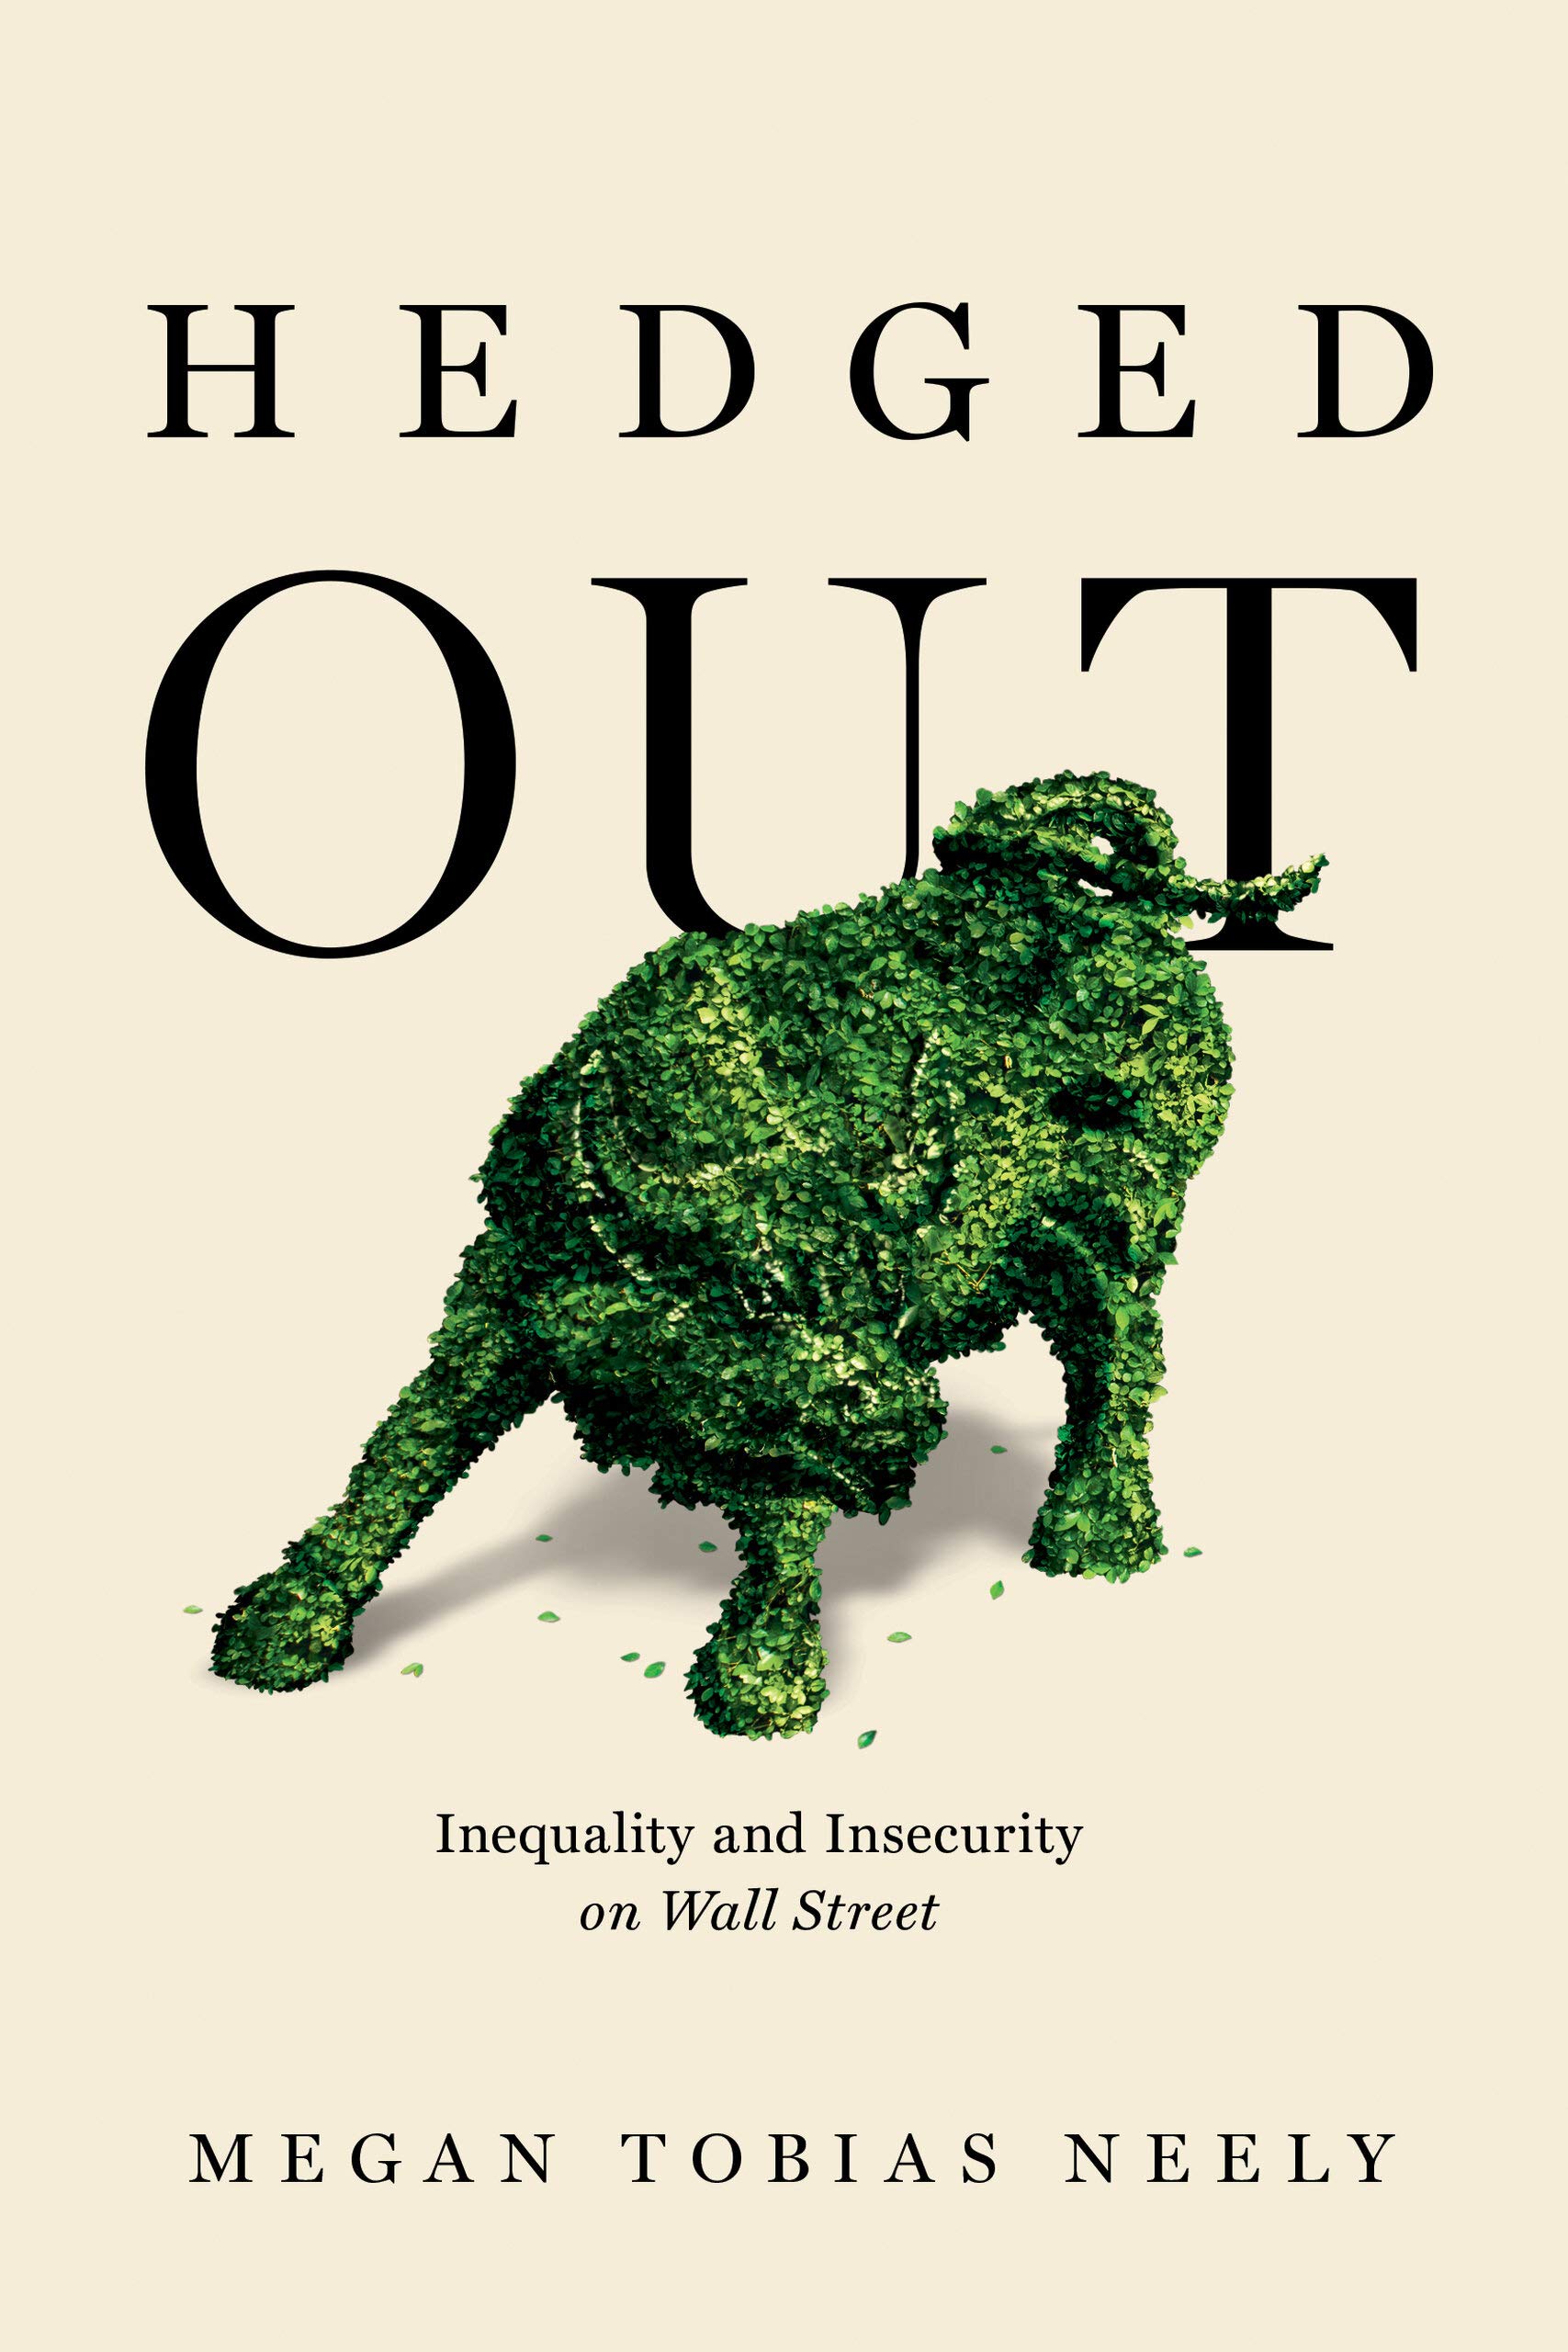 Image for "Hedged Out"